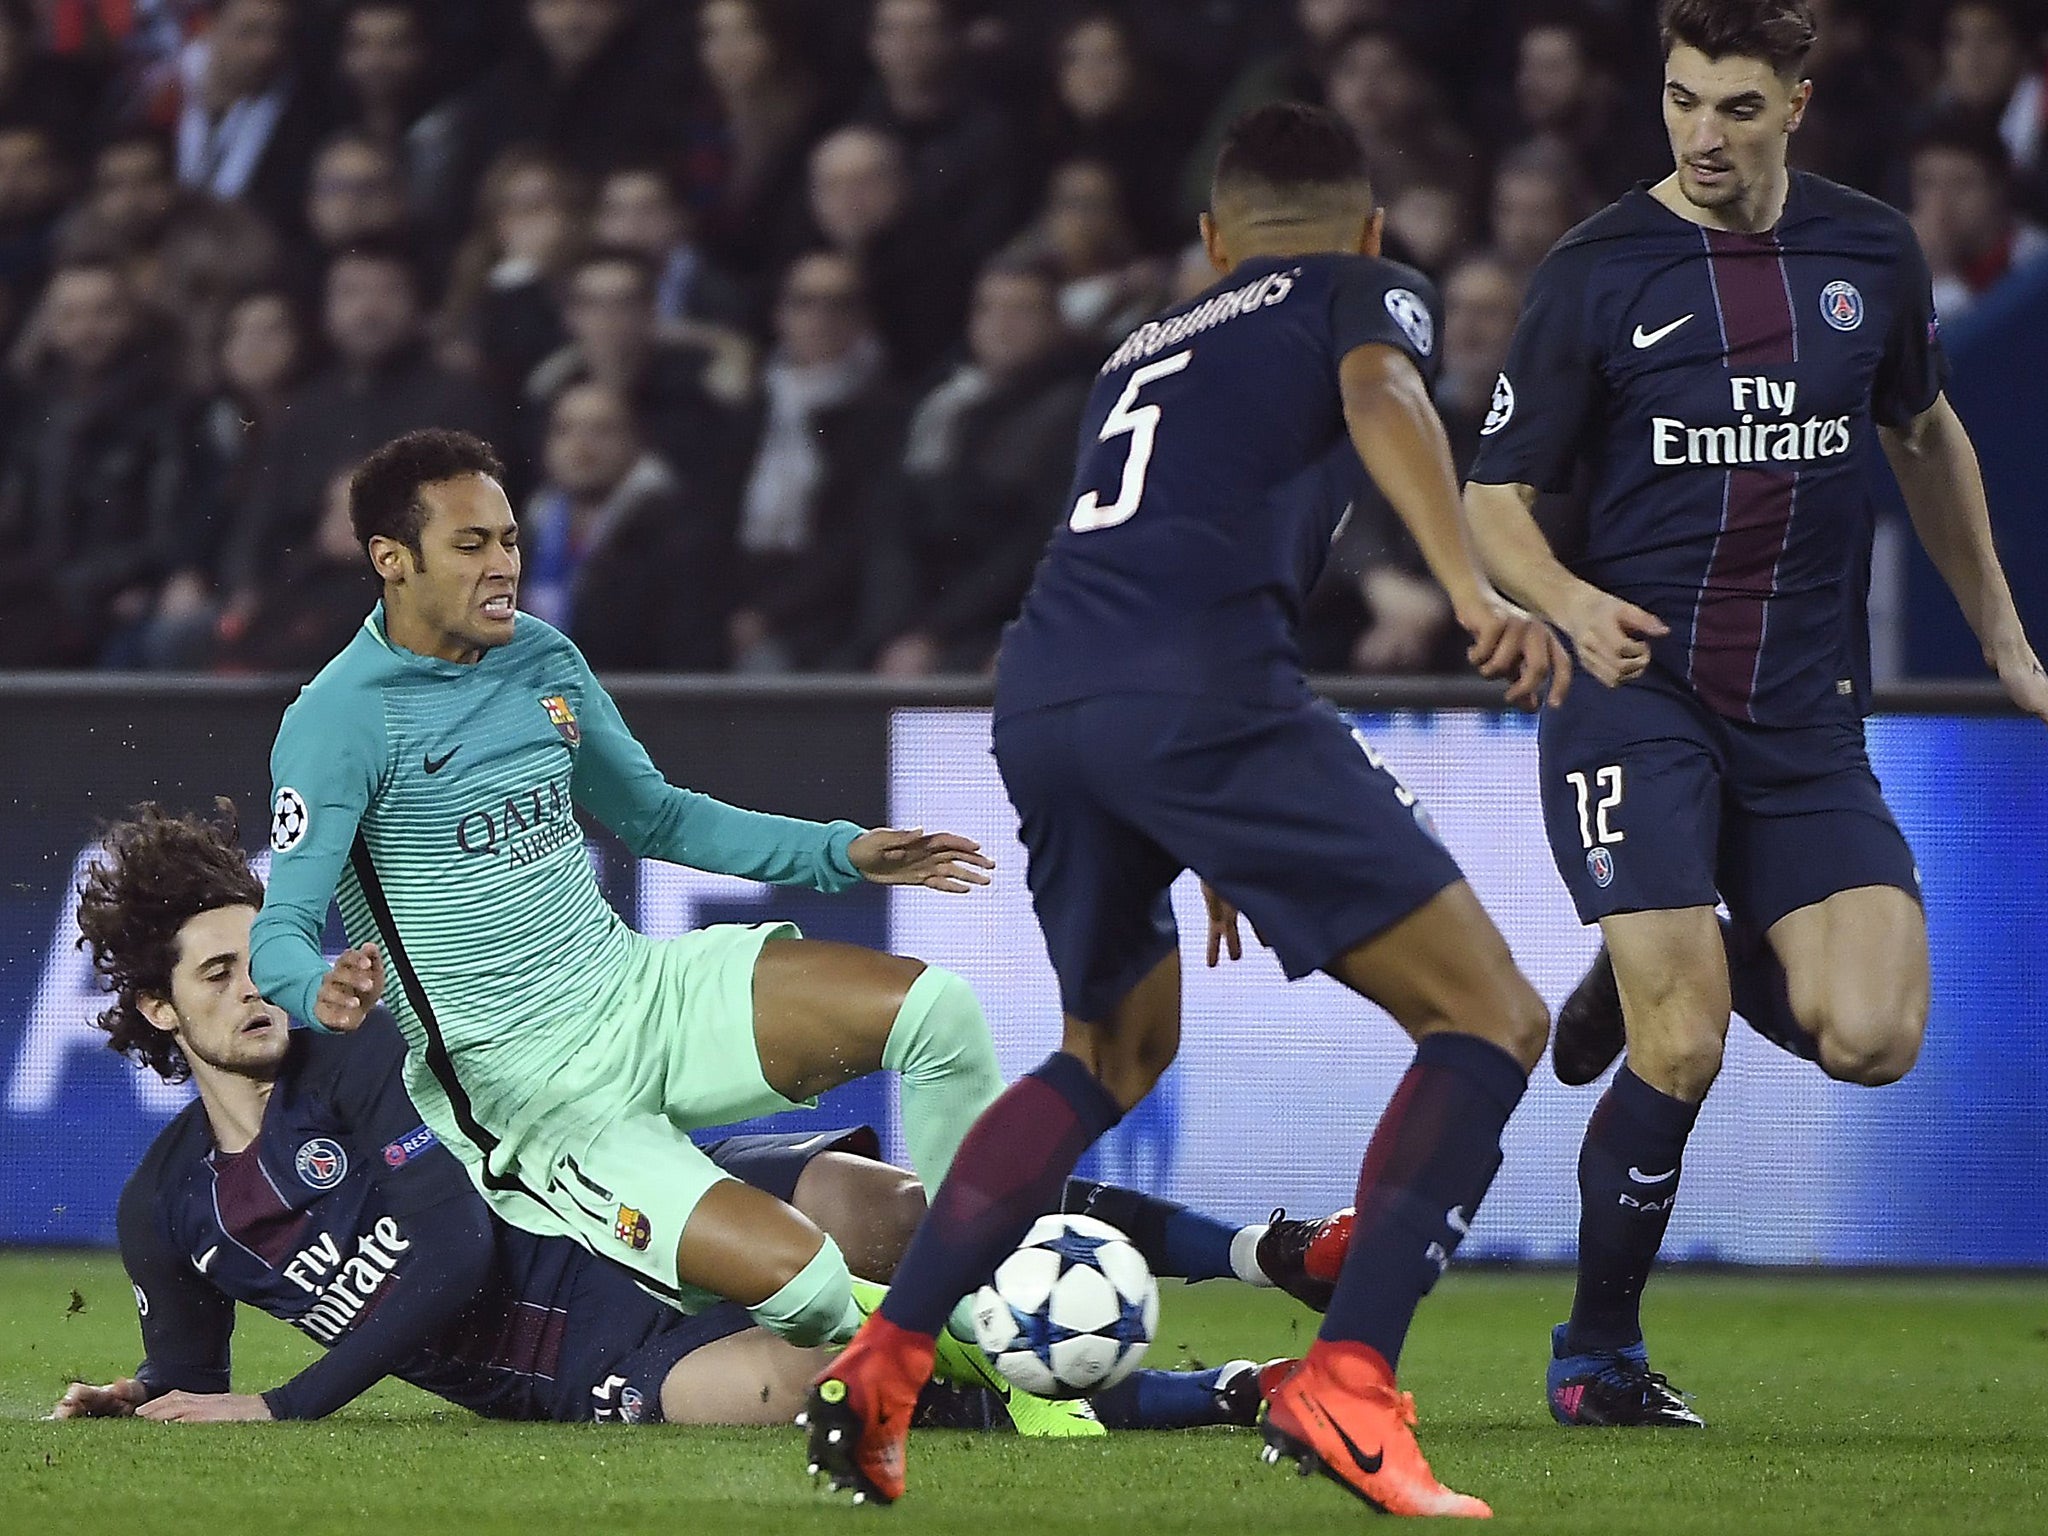 PSG vs Barcelona live: Latest score and updates from the Parc des Princes | The ...